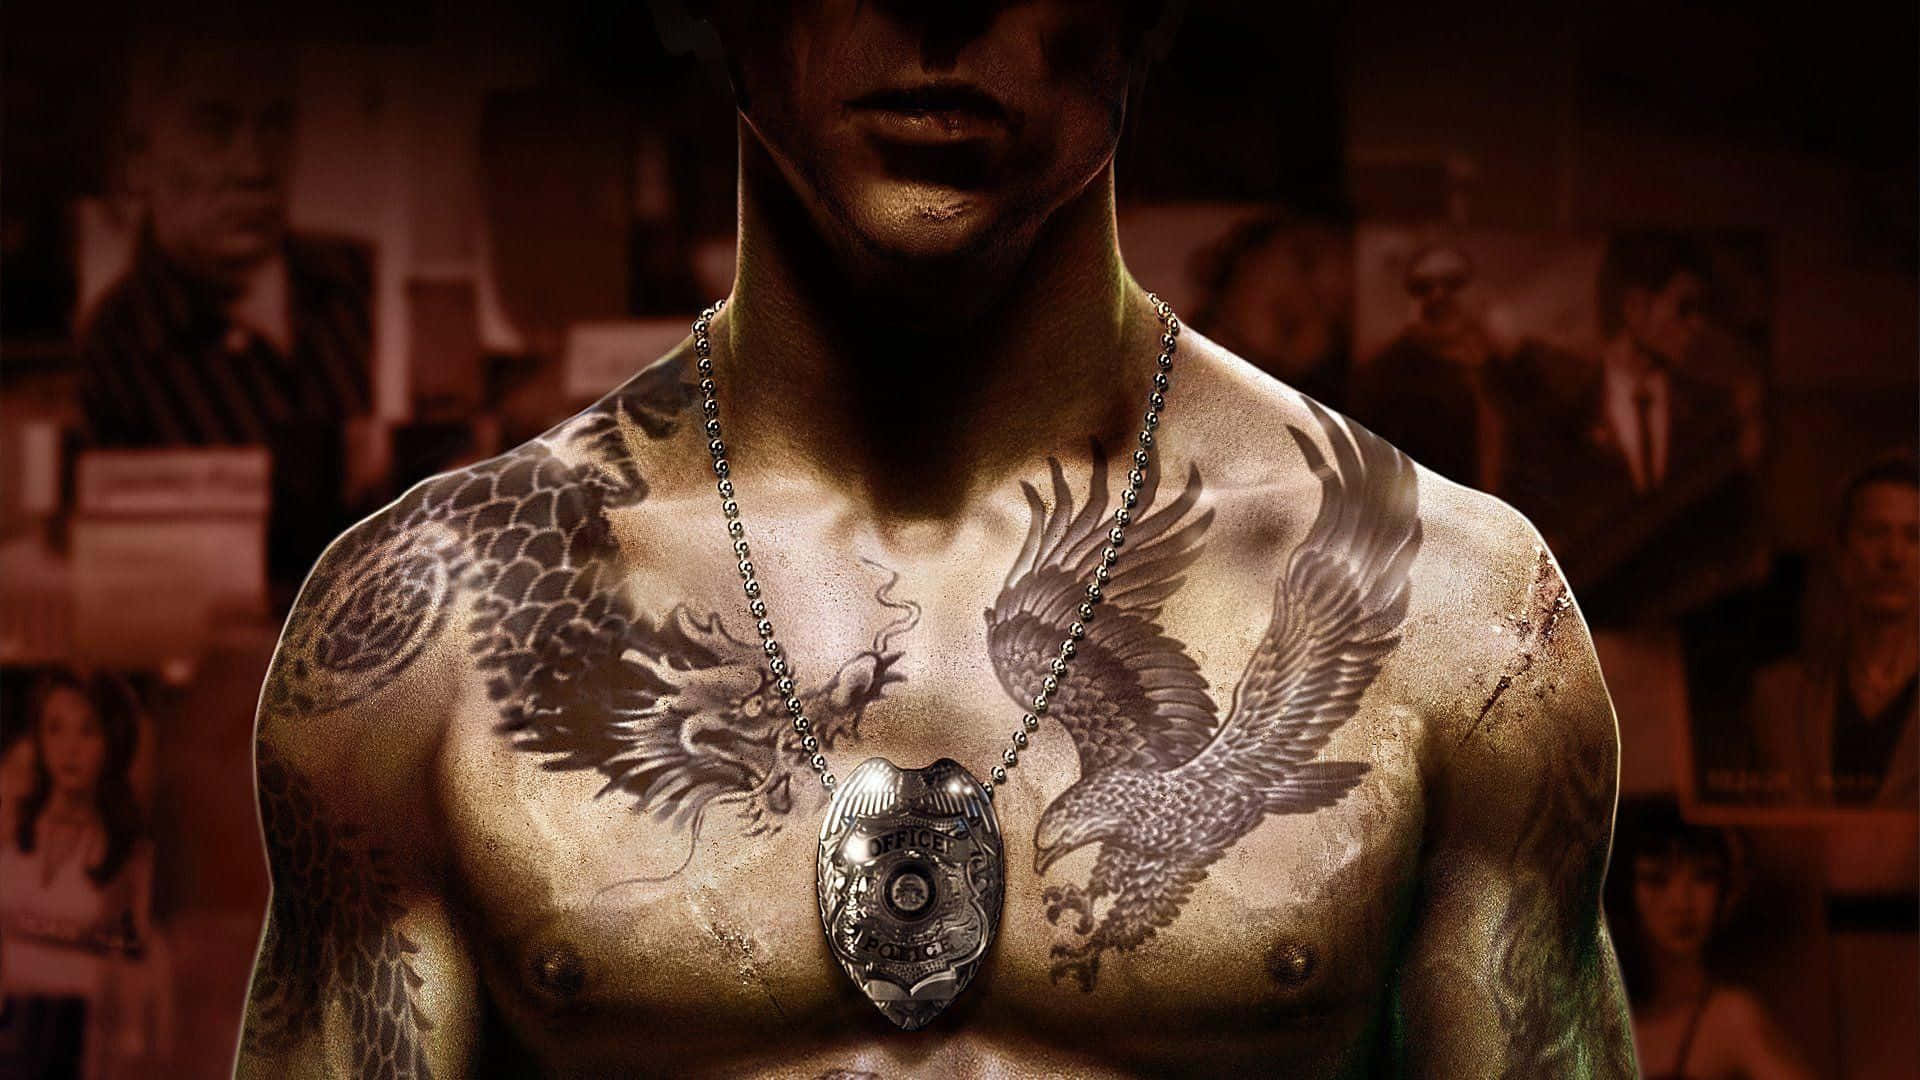 Sleeping Dogs Video Game Tattooed Character iPhone 6 Plus HD Wallpaper